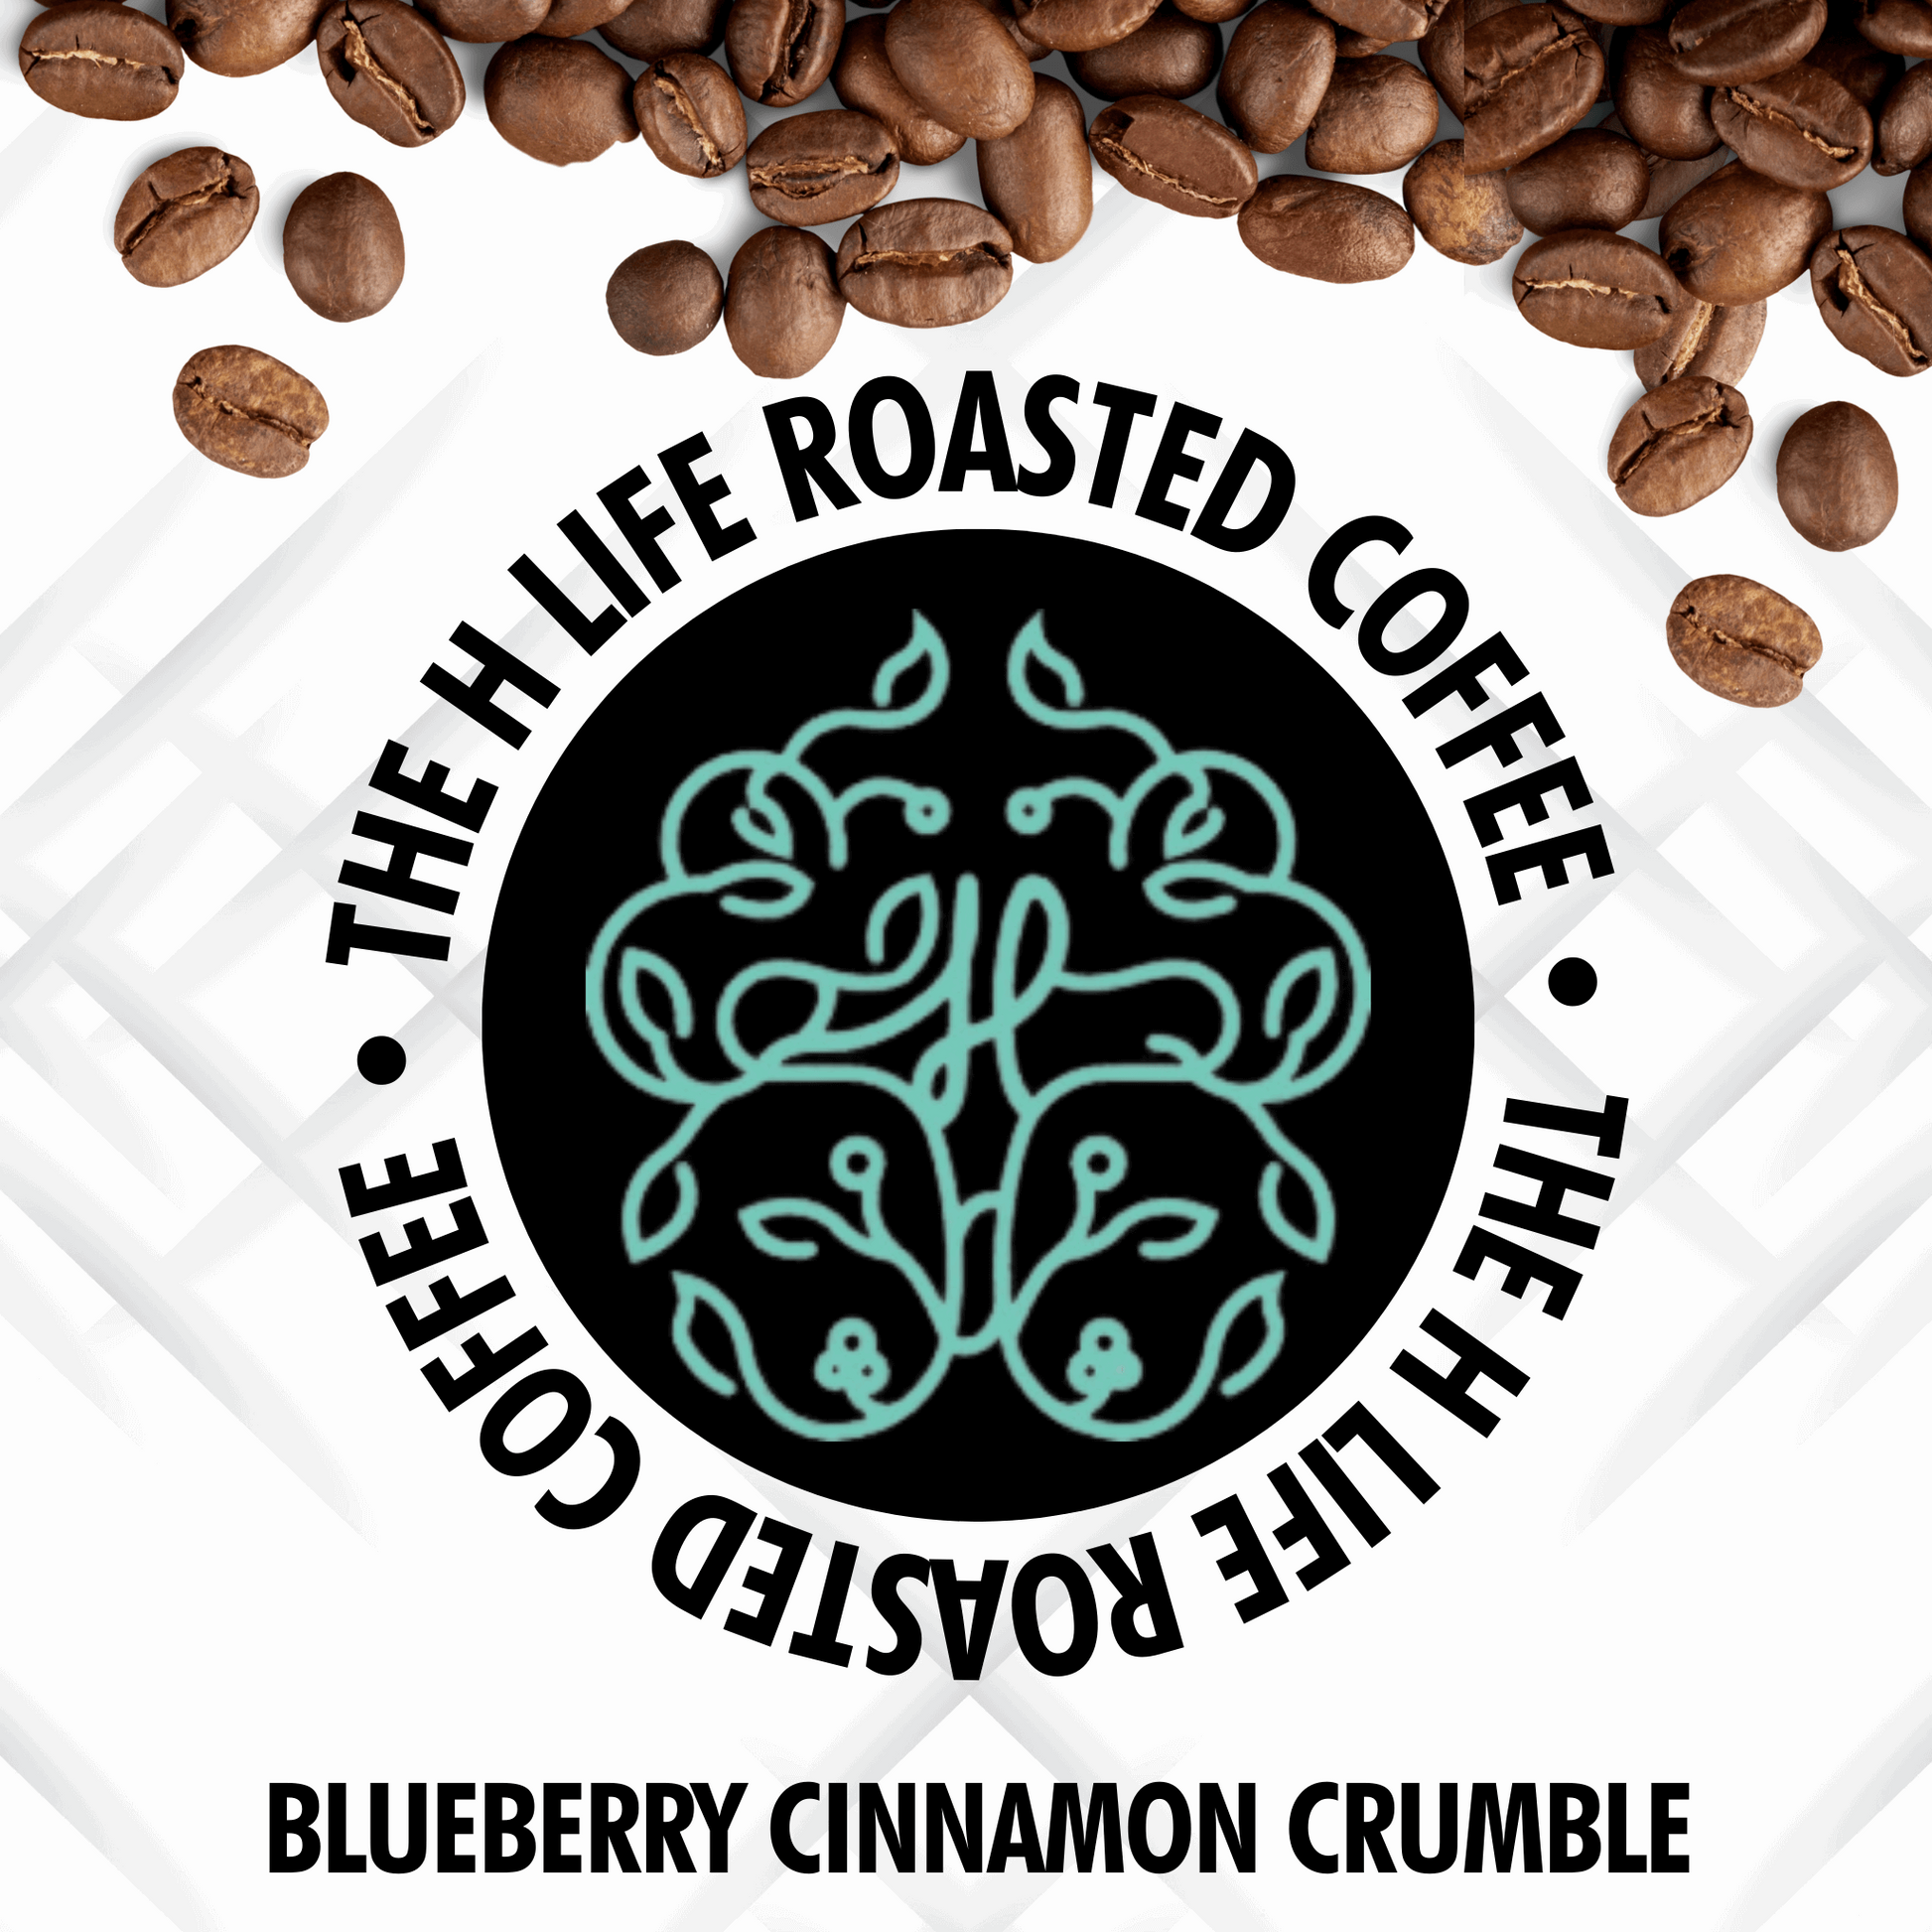 On a white textured background there are coffee beans spilling from the top and The H Life brain logo in the center. The H Life Roasted Coffee lineup highlighting the Blueberry Cinnamon Crumble product.